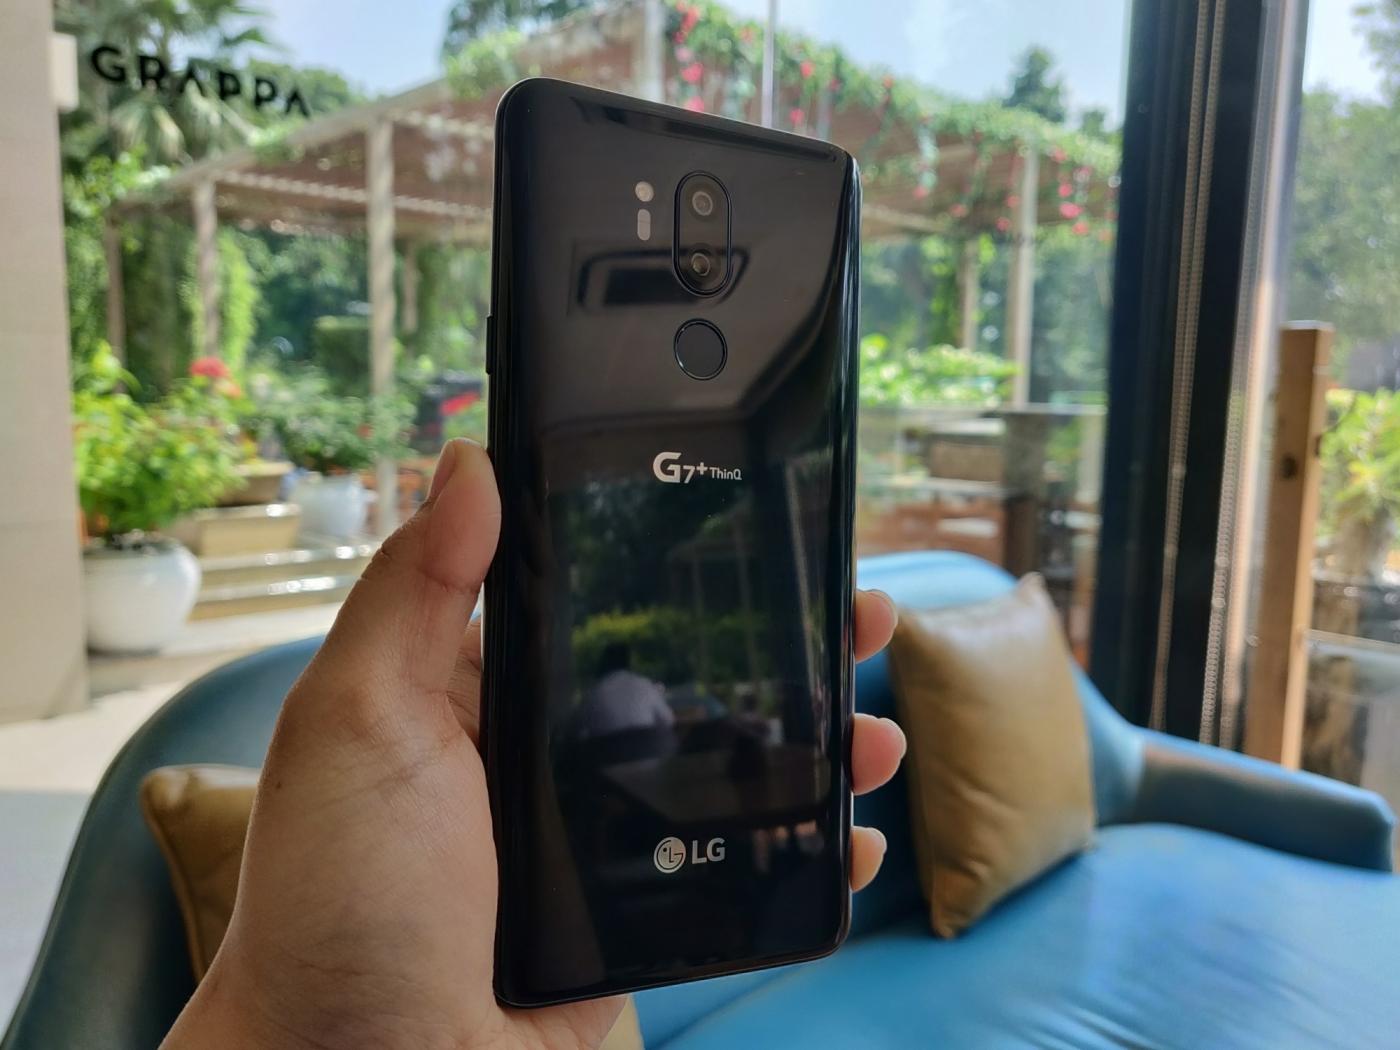 LG has cleverly pitted the G7+ ThinQ in the sub-Rs 40,000 price segment that competes with the likes of the affordable flagships, such as the OnePlus 6 and the Asus Zenfone 5Z. by .